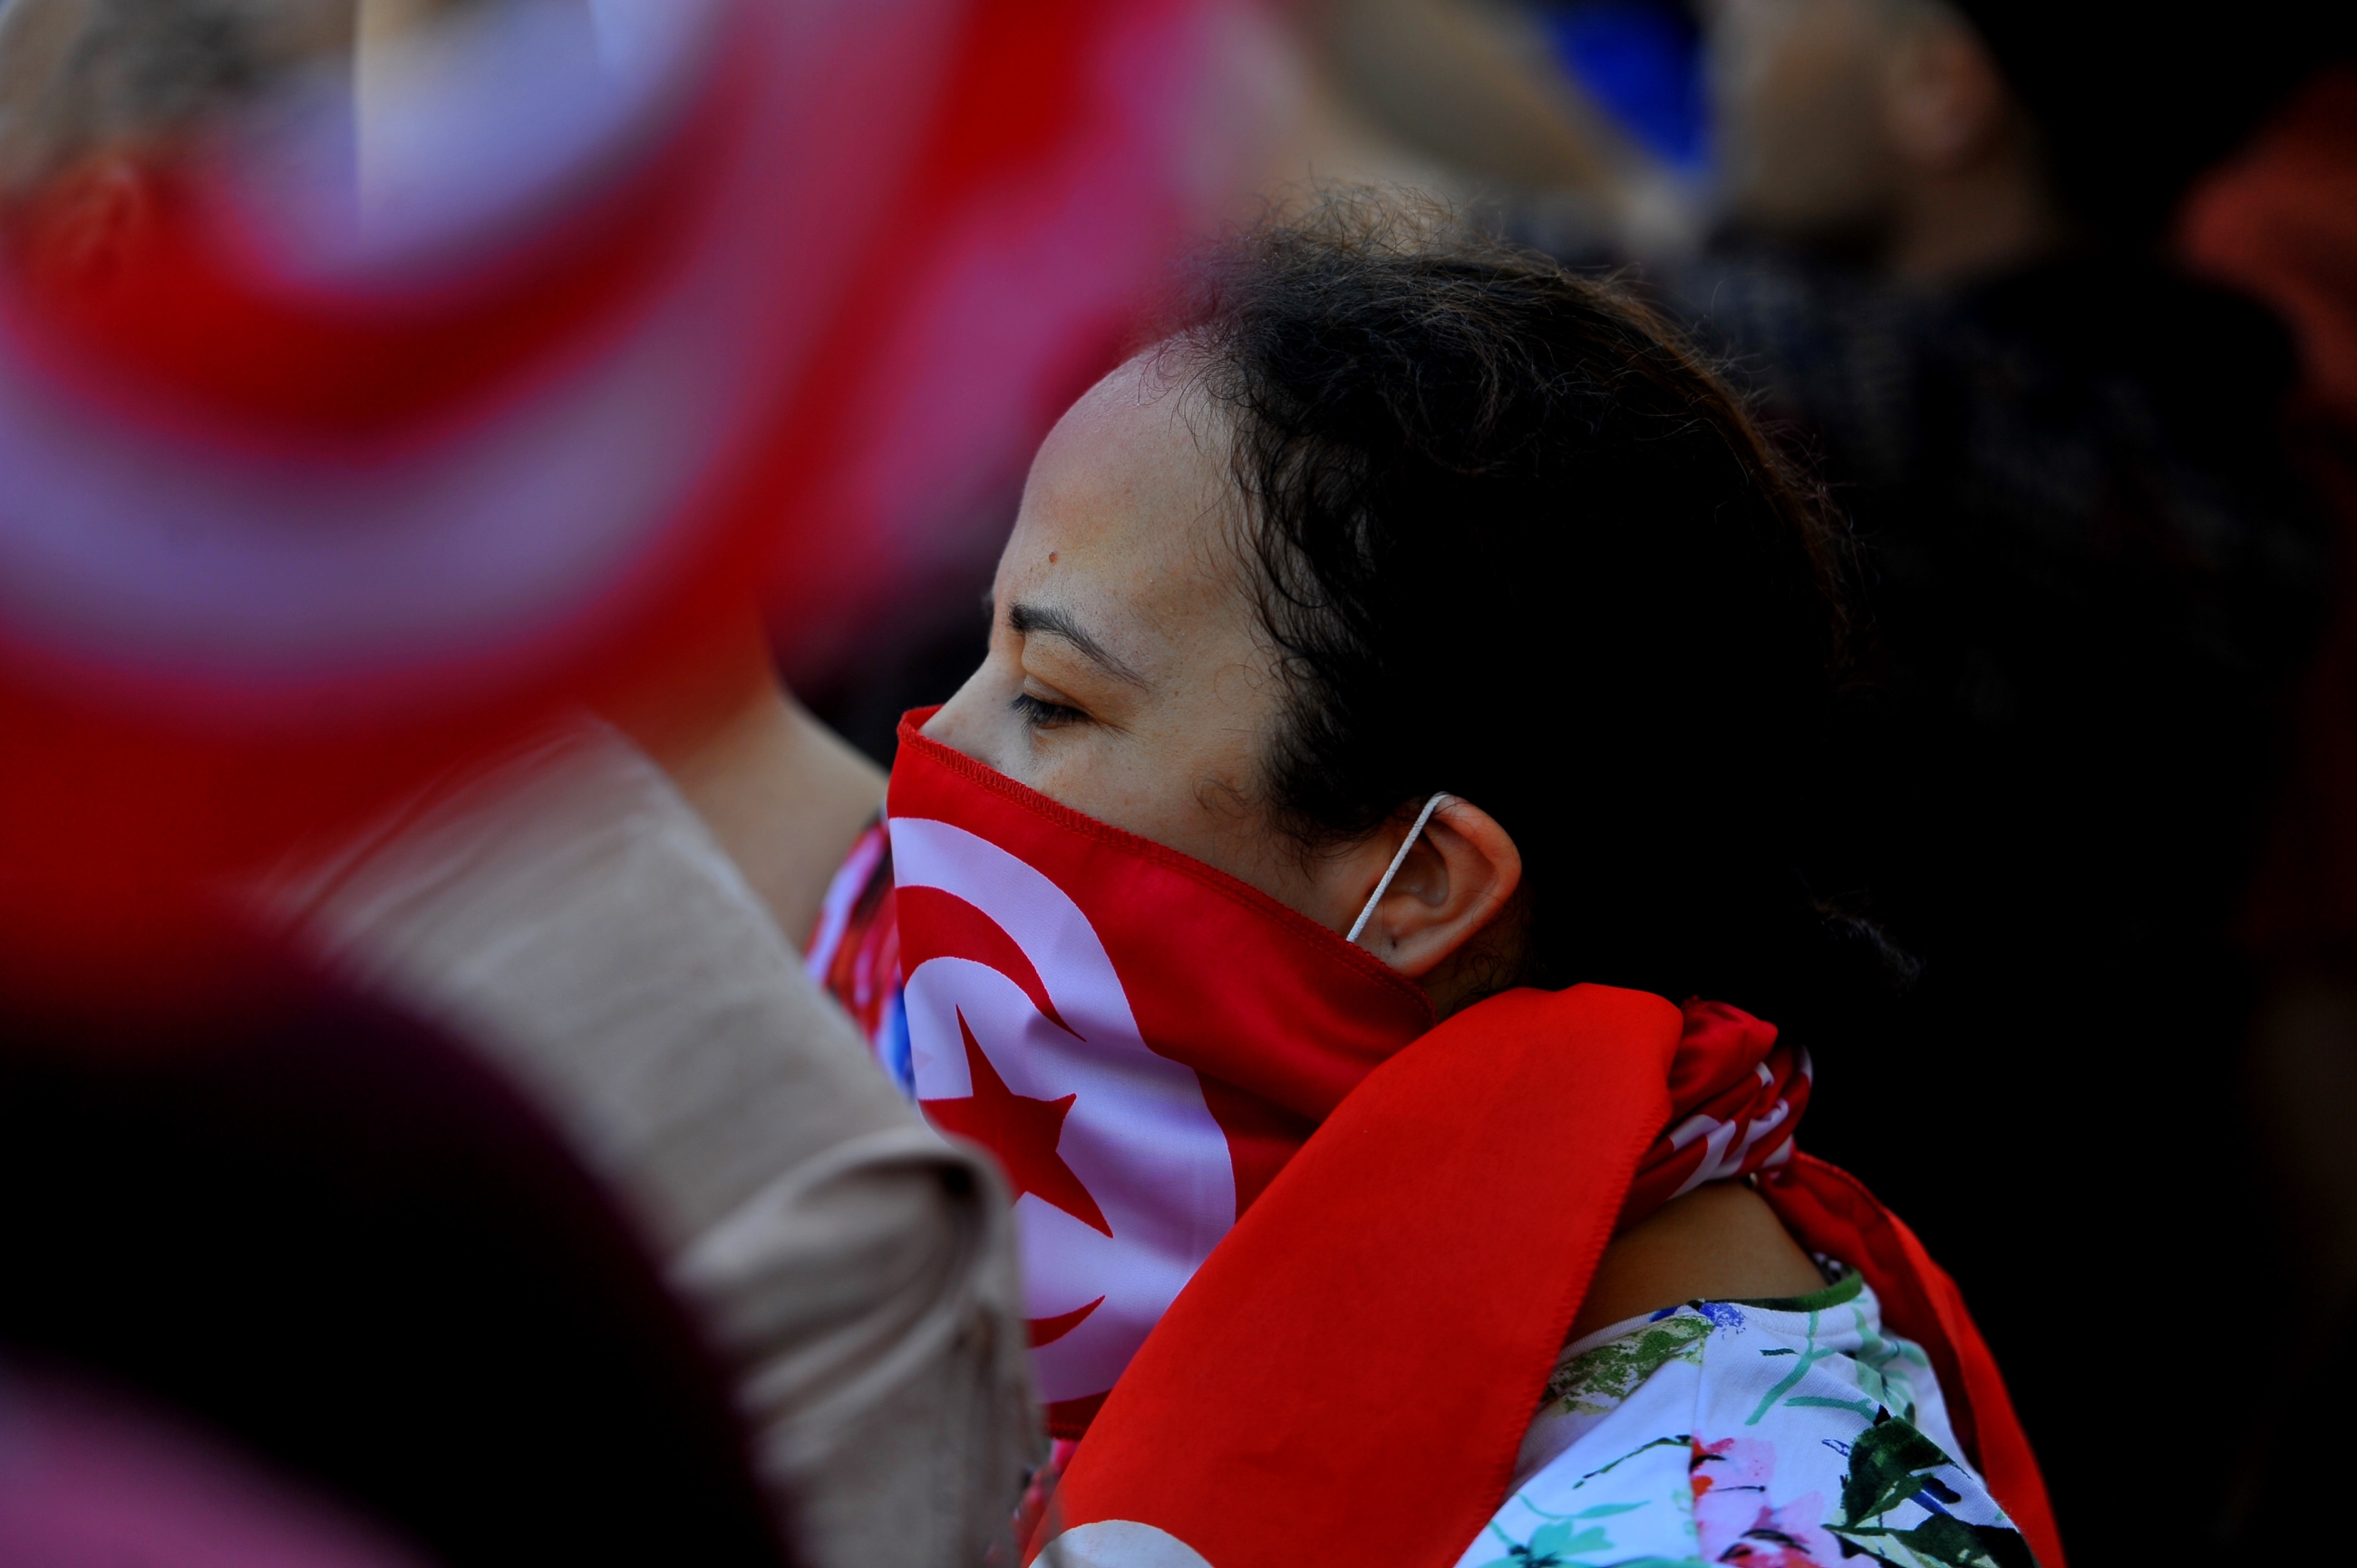 Tunisian protesters raise flags and placards on 23 July 2022, during an anti-Saied demonstration in the capital Tunis. (Reuters)